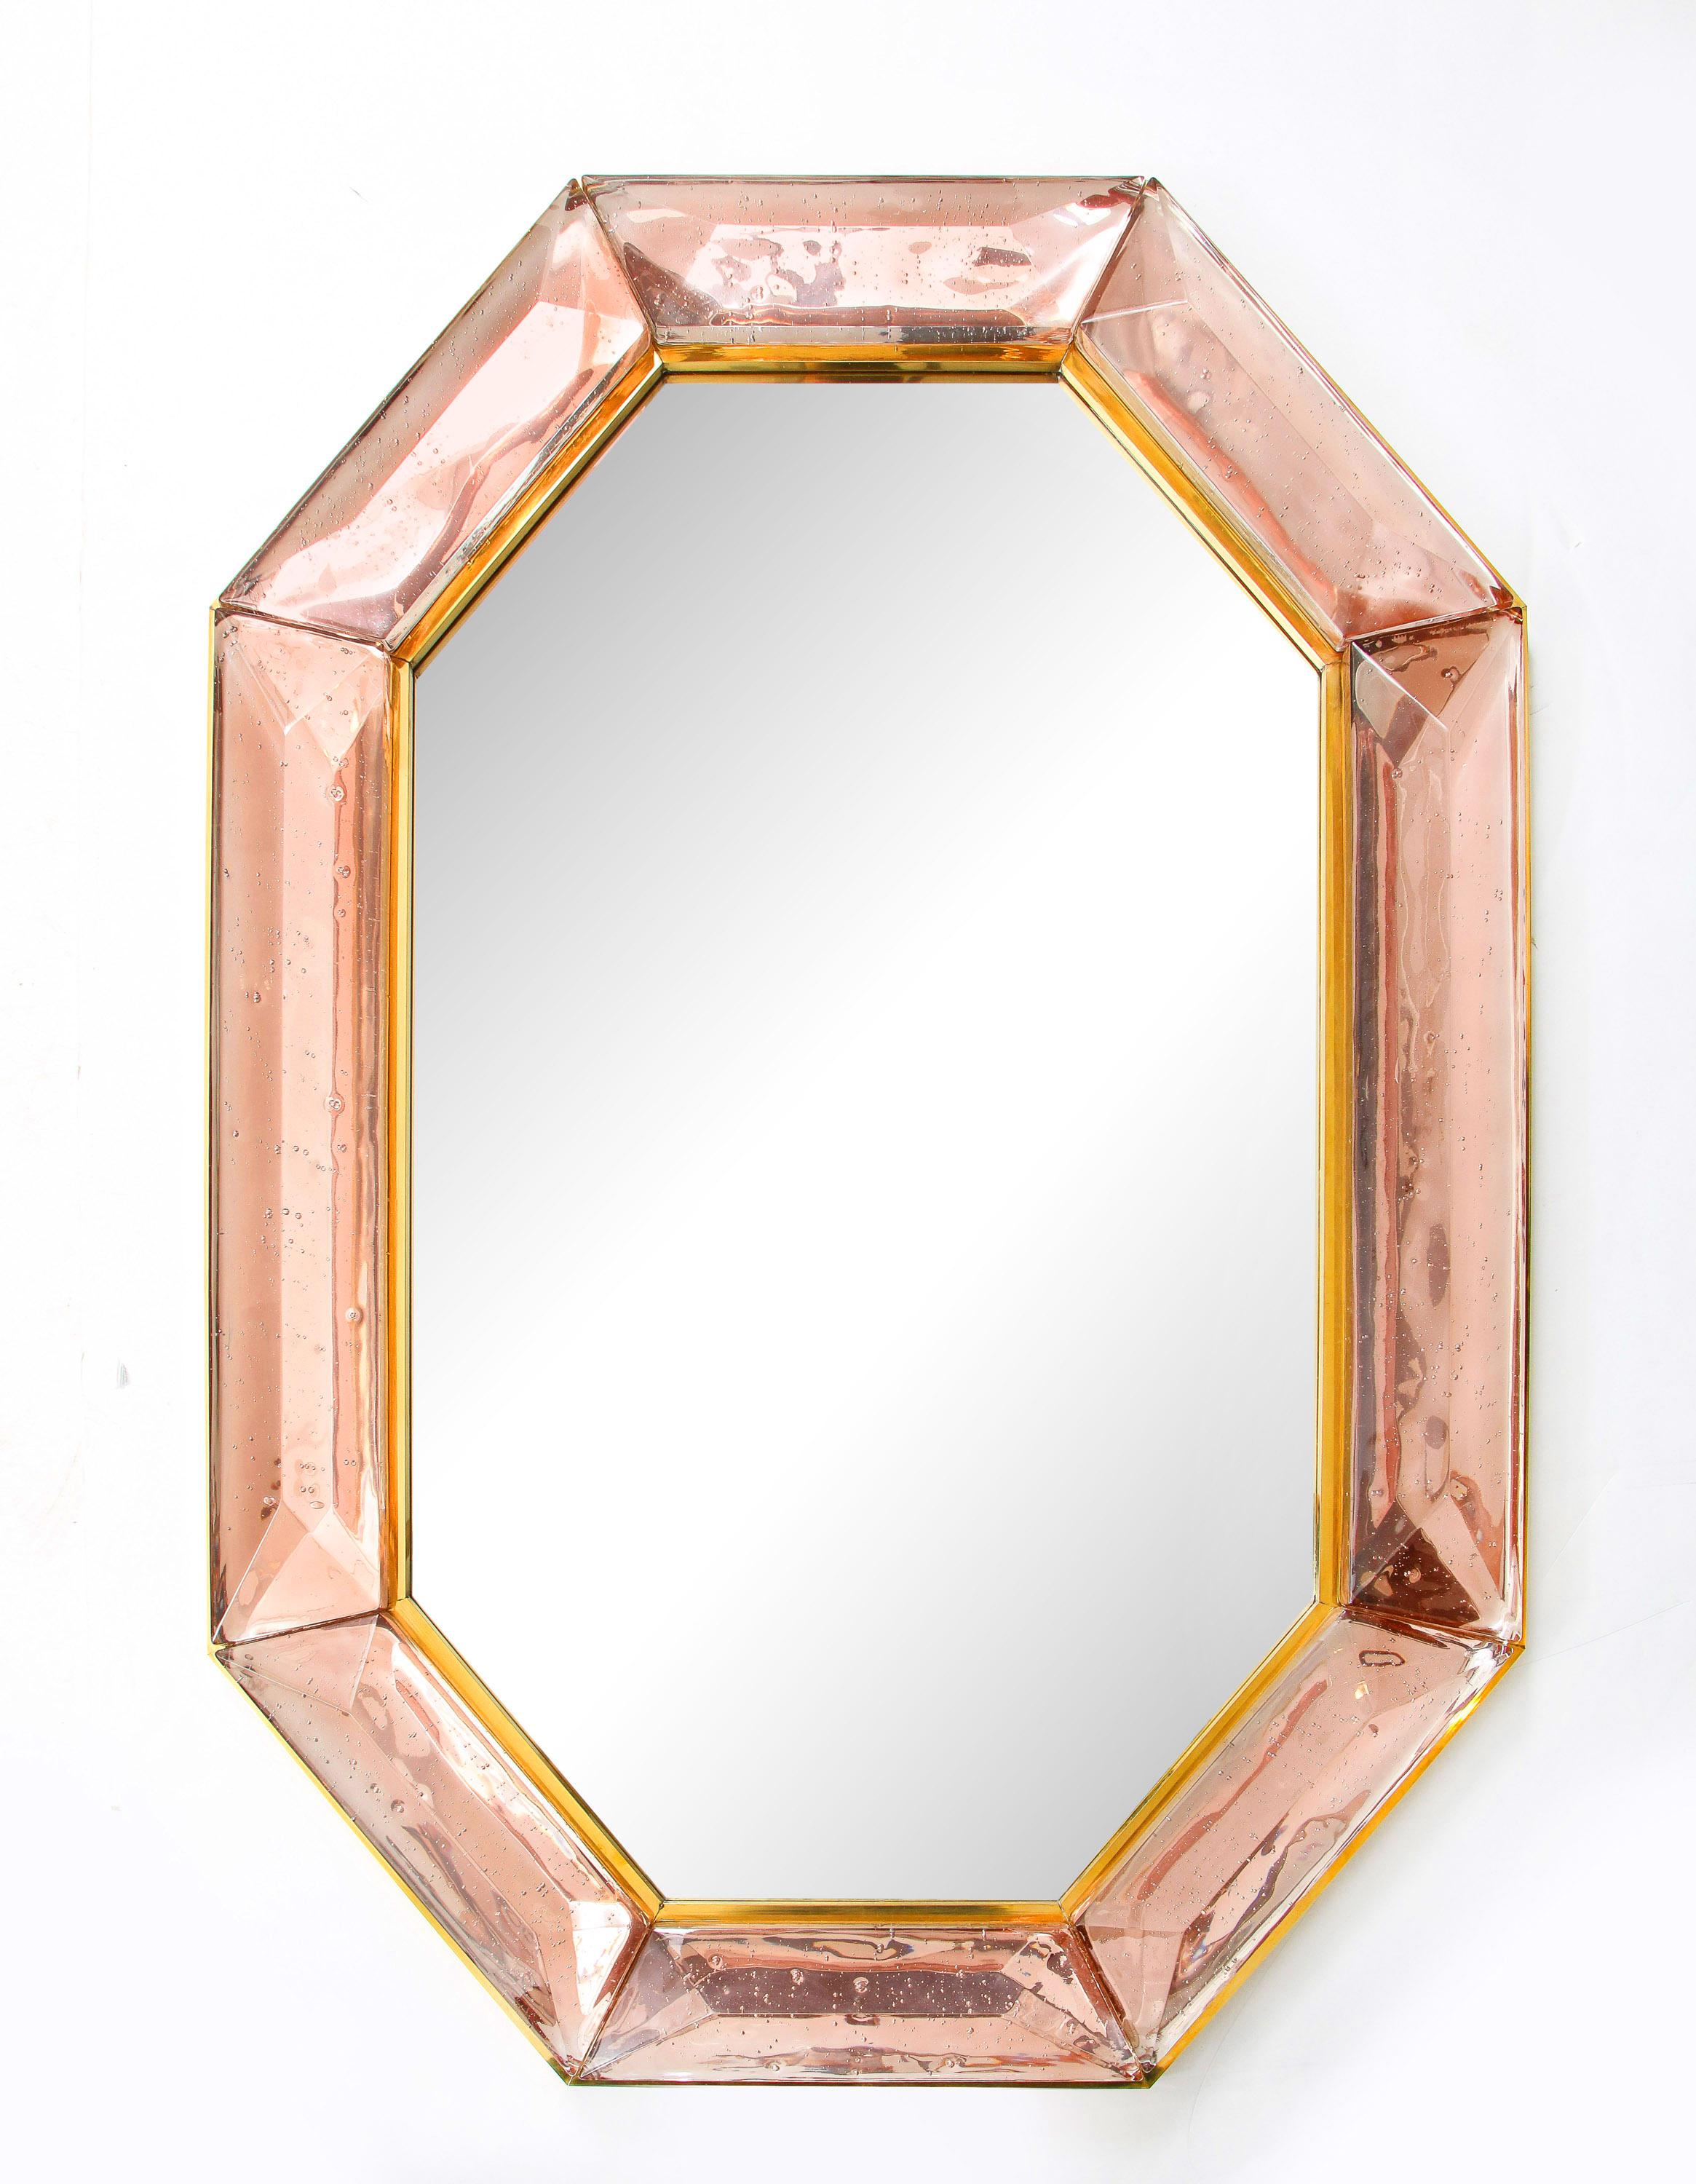 Pair of bespoke octagon pink Murano glass mirrors, in stock
Vivid and intense pink glass block with naturally occurring air inclusions throughout
Highly polished faceted pattern
Brass gallery all around
Each mirror is a unique luxury handcrafted